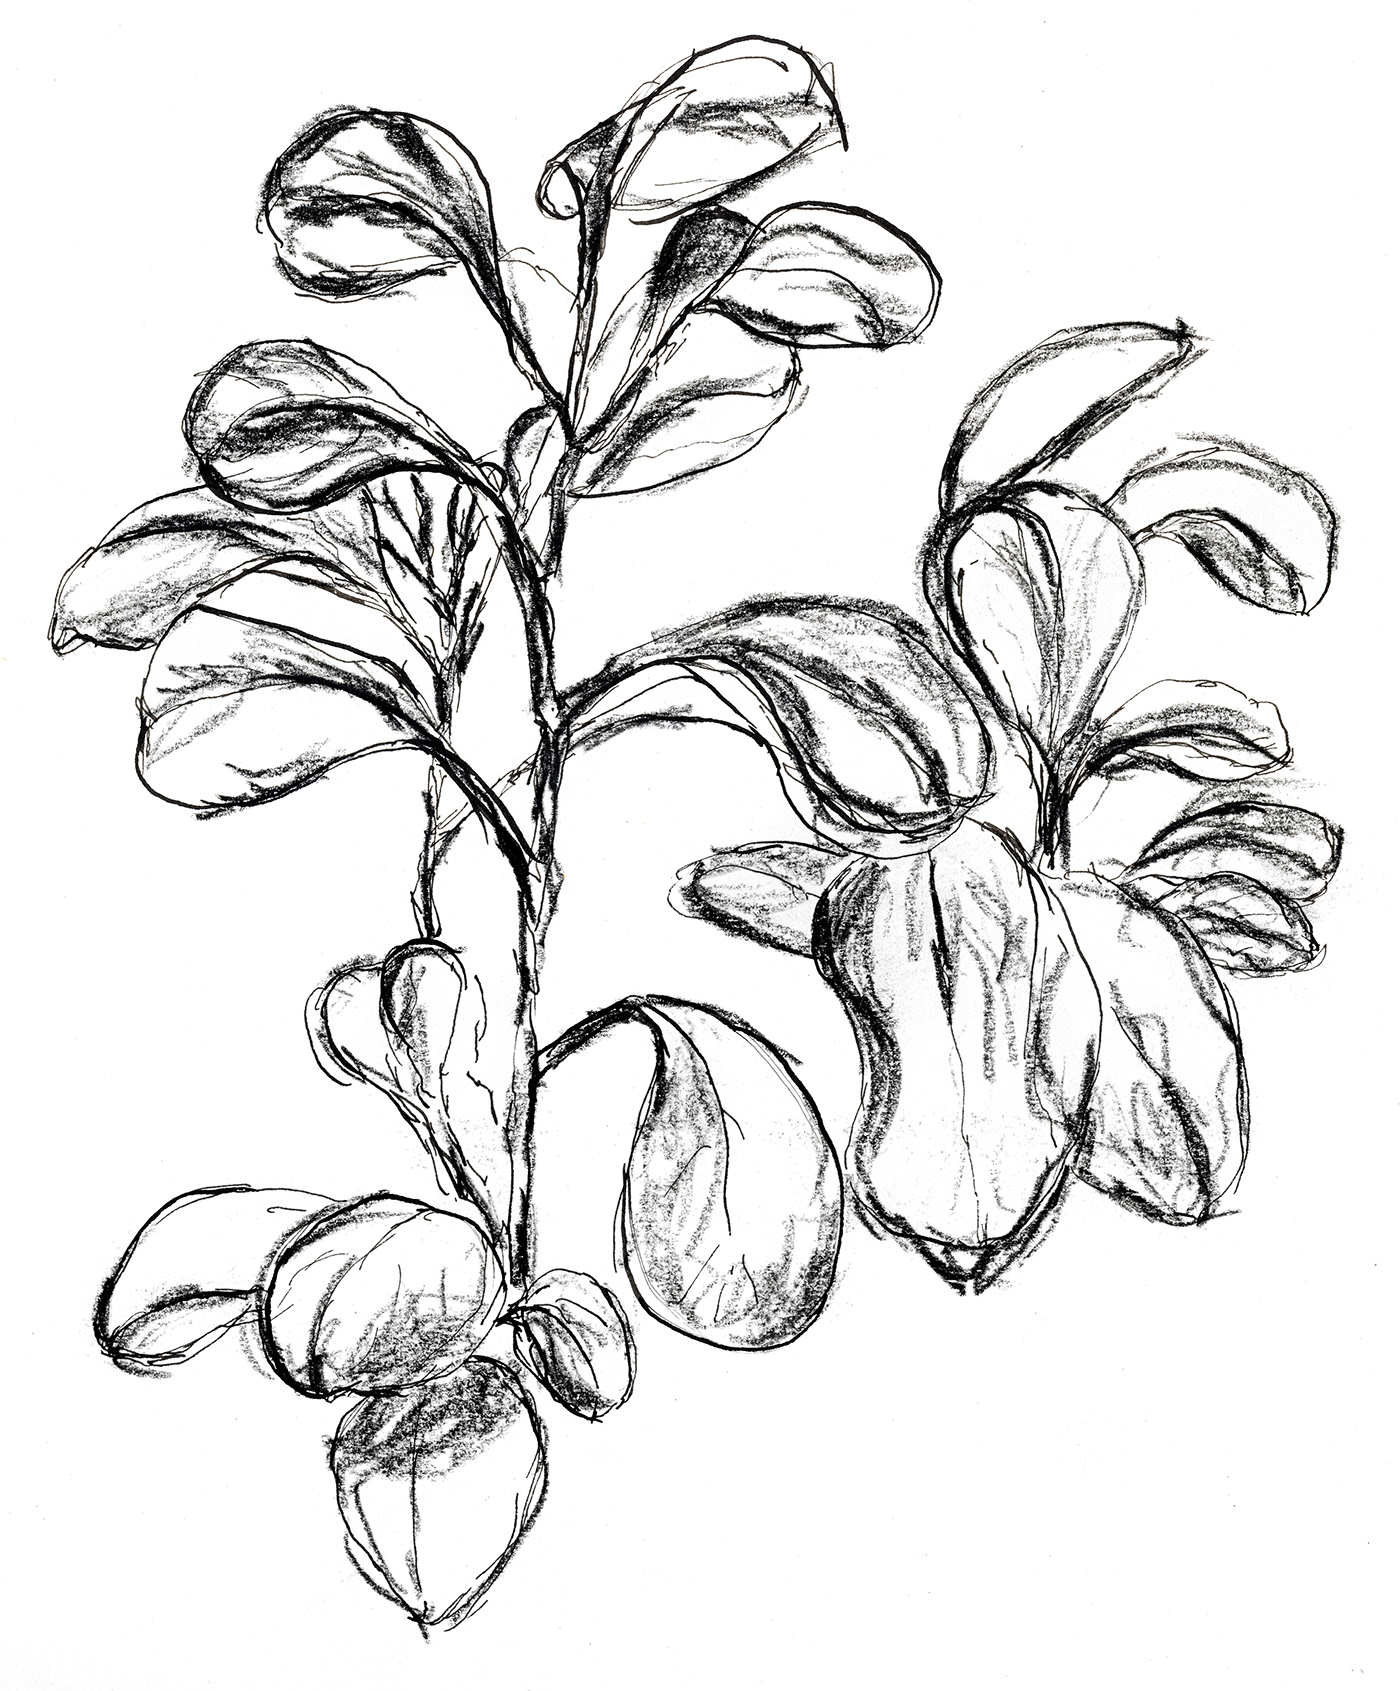 A fast drawing of a plant with metal nib and conte.